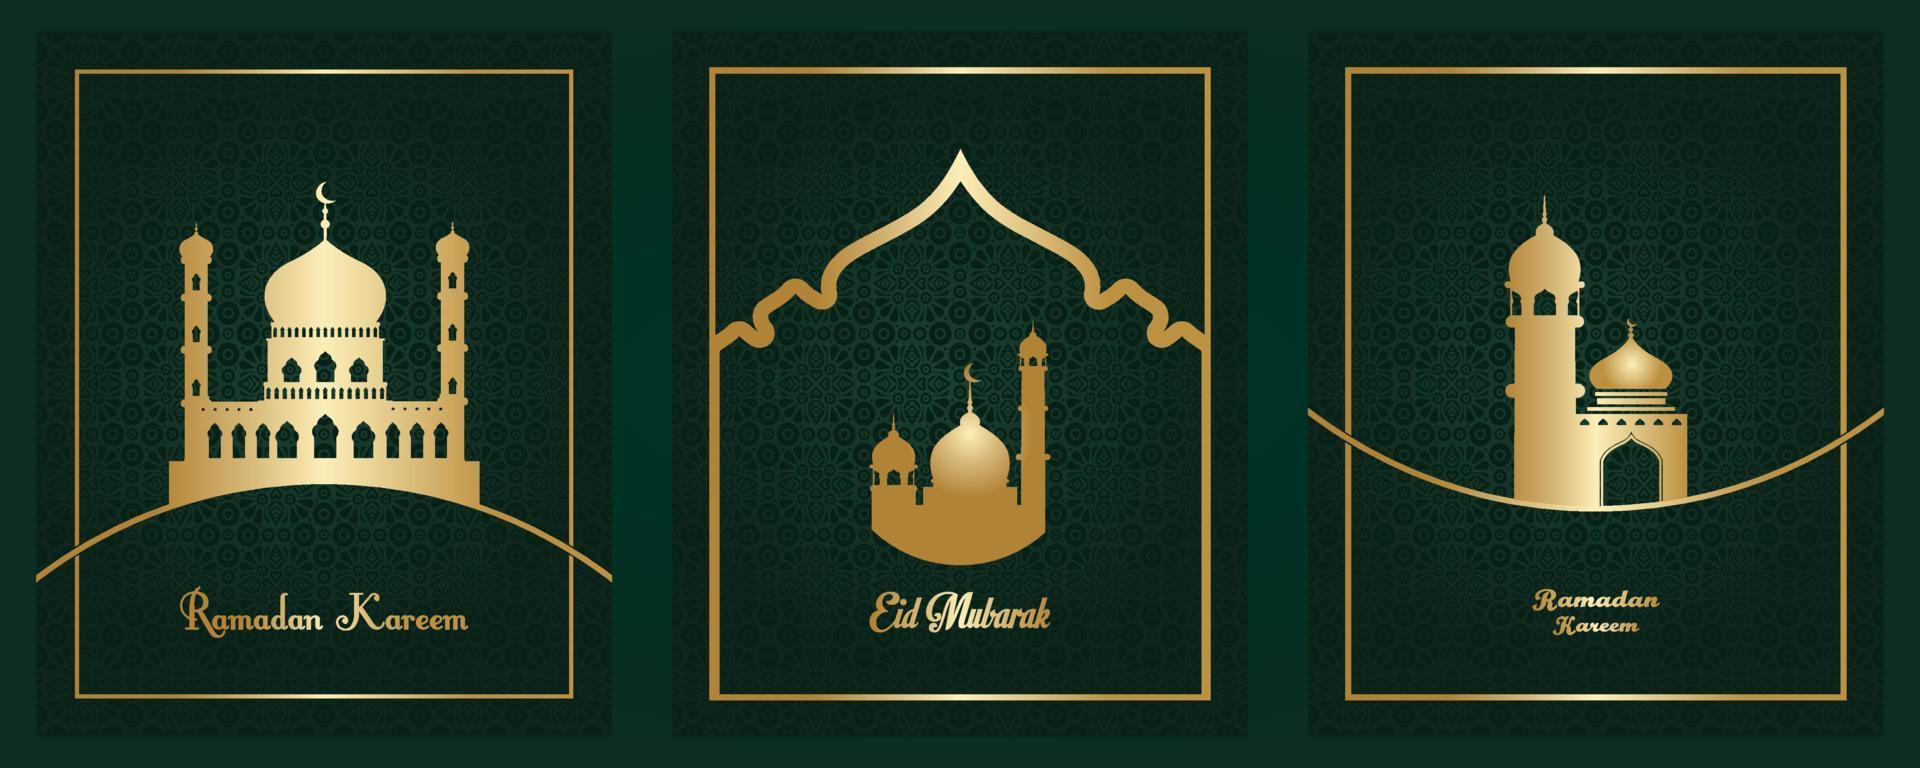 Ramadan Kareem and Eid Mubarak festival Islamic design. mosque dome silhouette with place for text greeting card and banner. Modern Style illustration vector